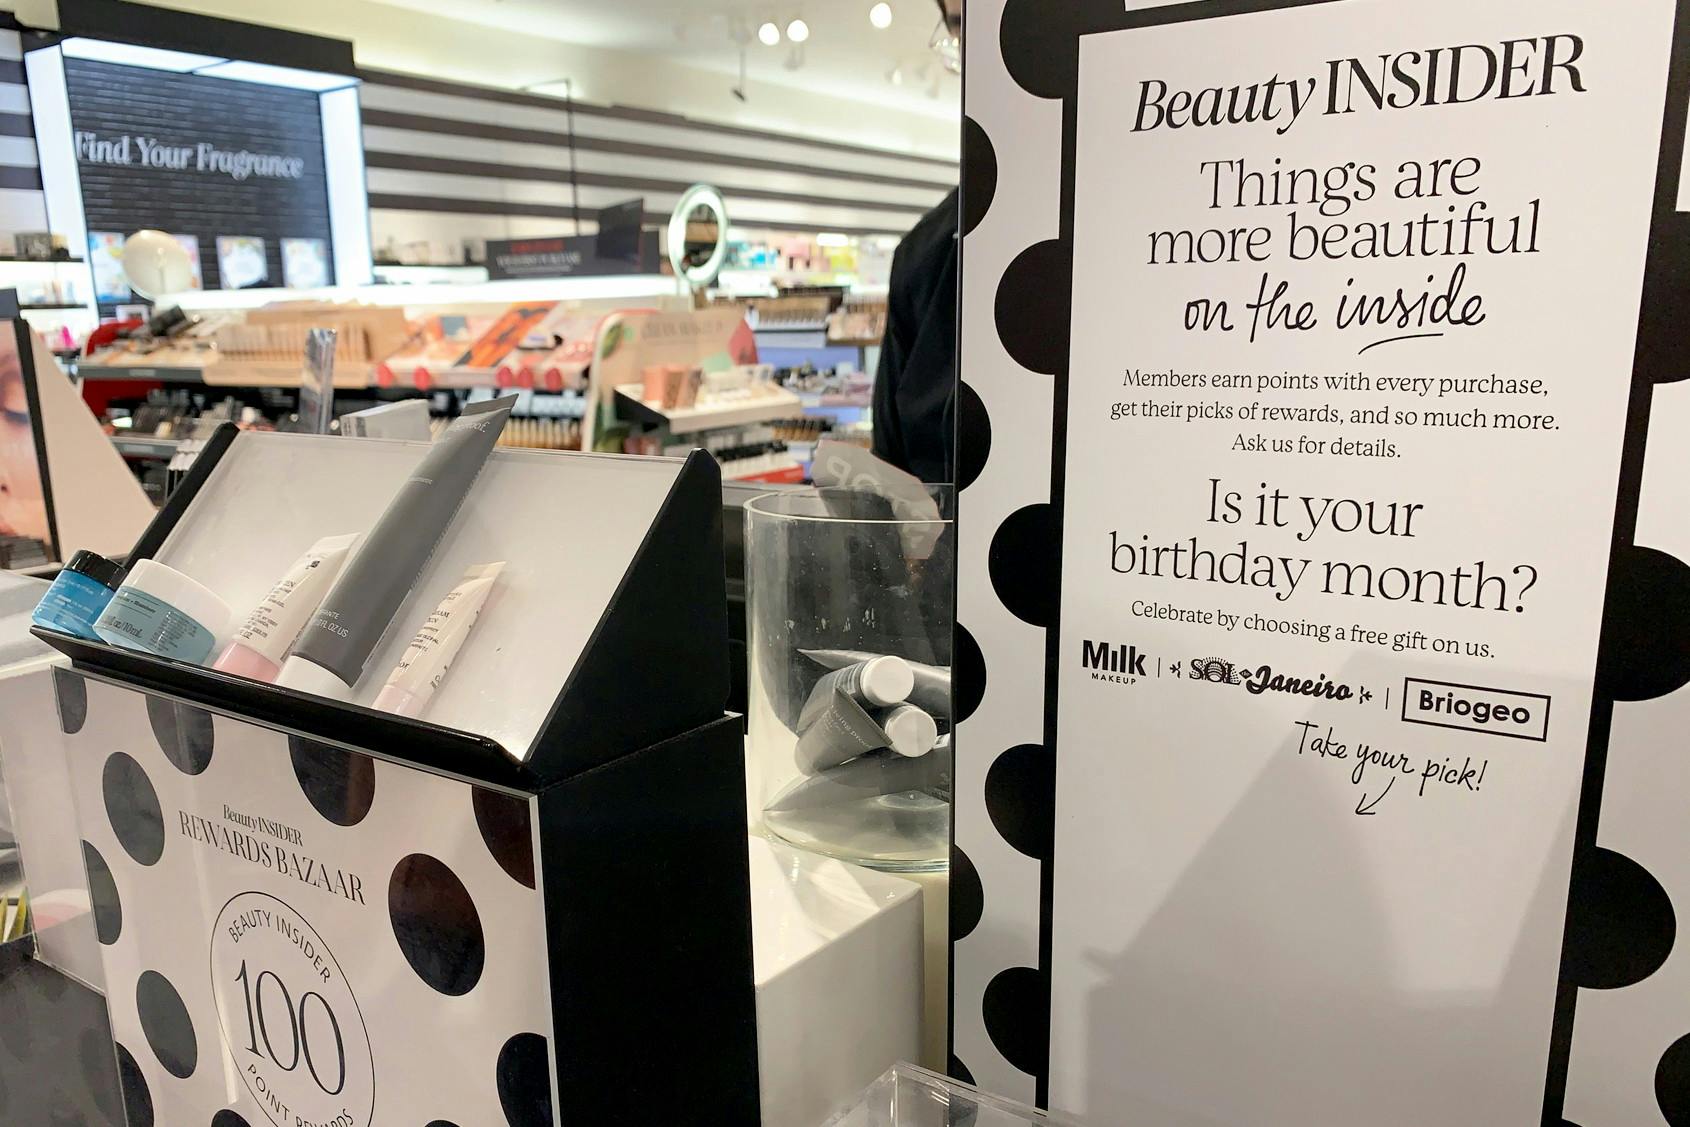 Sephora products available to customers with redemption of rewards points.